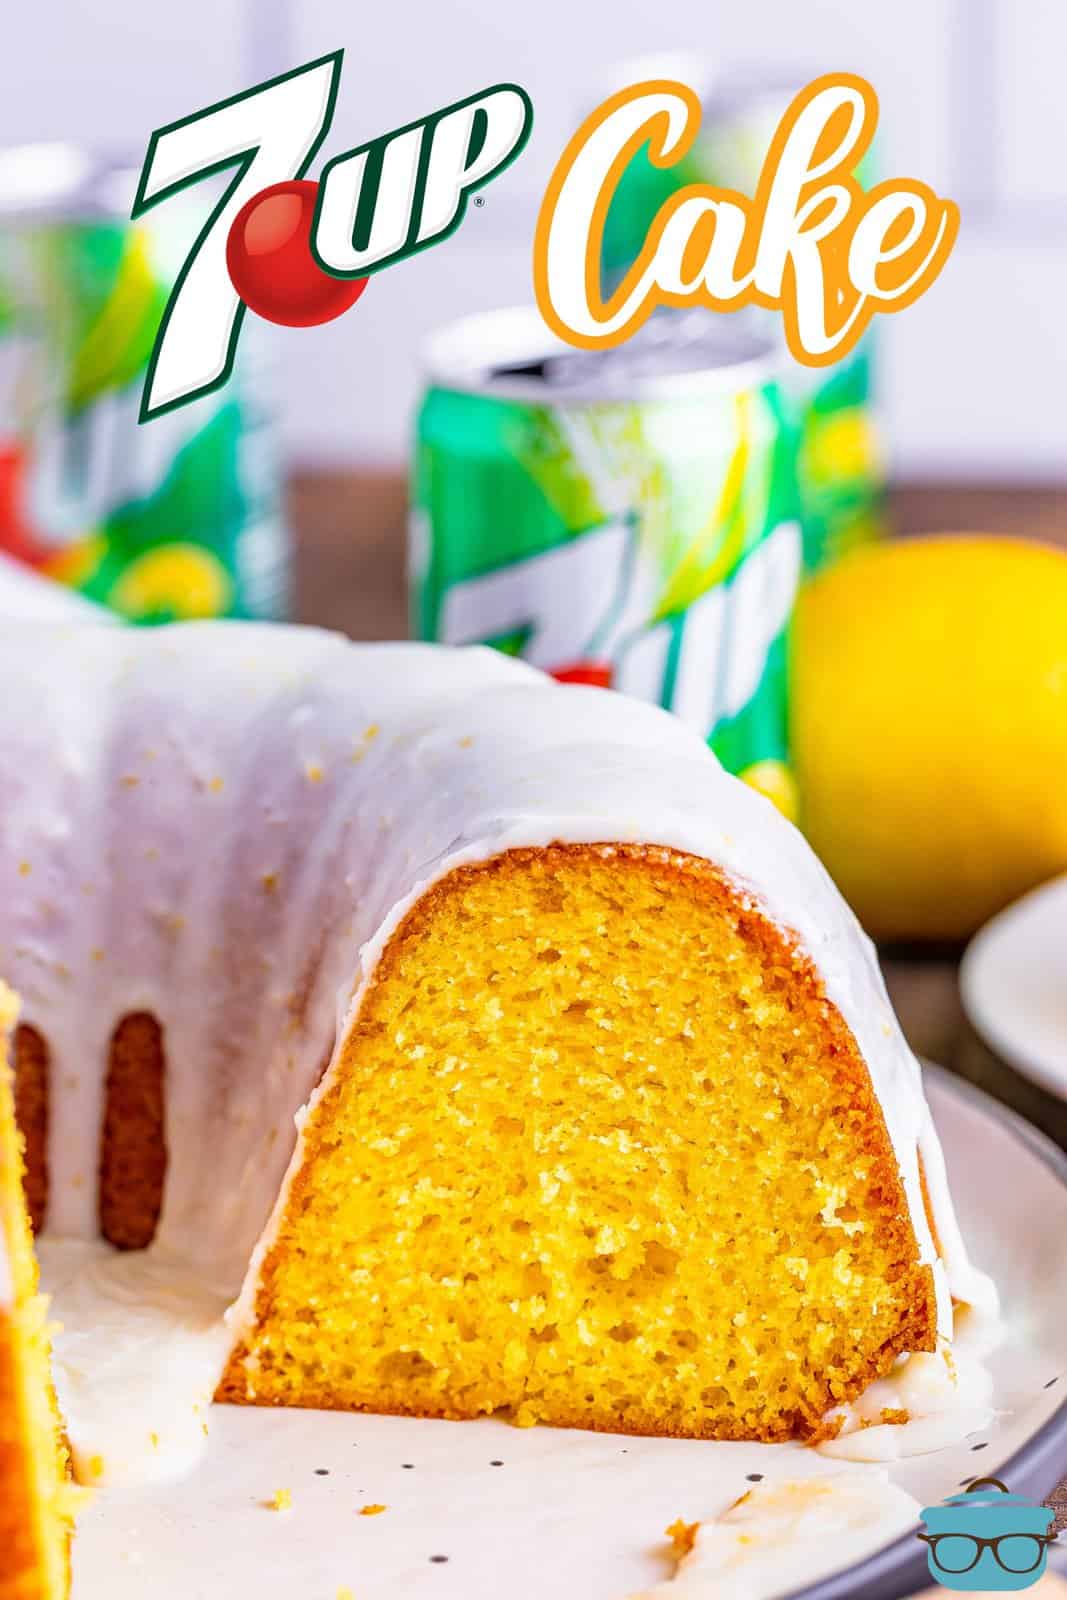 a bundt cake shown on a plate with a slice removed with cans of 7Up soda in the background.